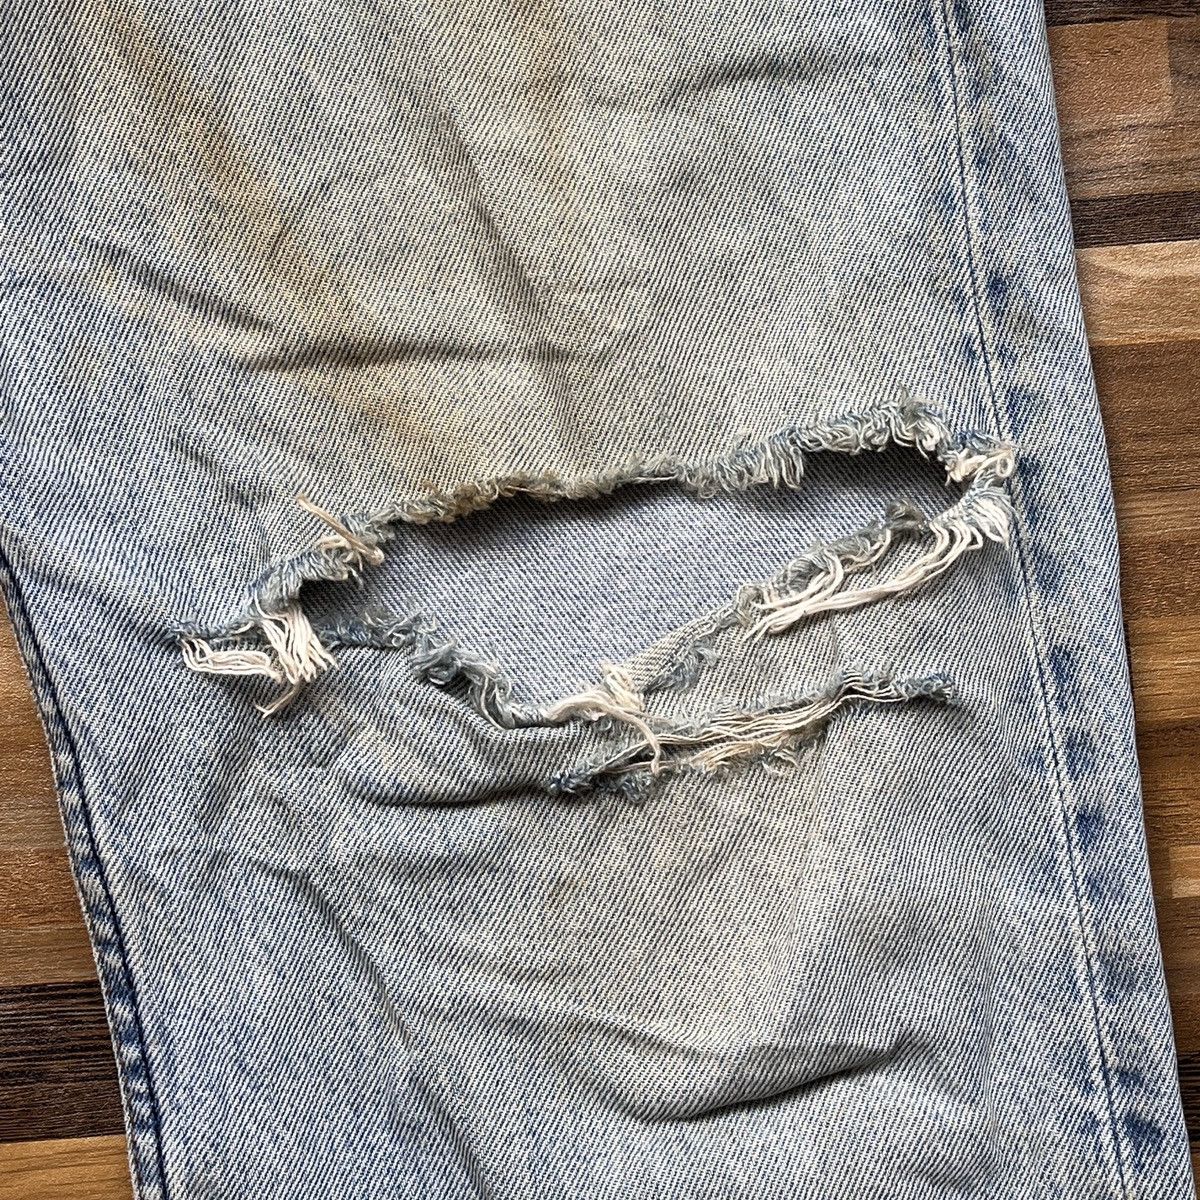 Ripped Levis 501 Vintage 1993 Straight Cut Made In USA - 15